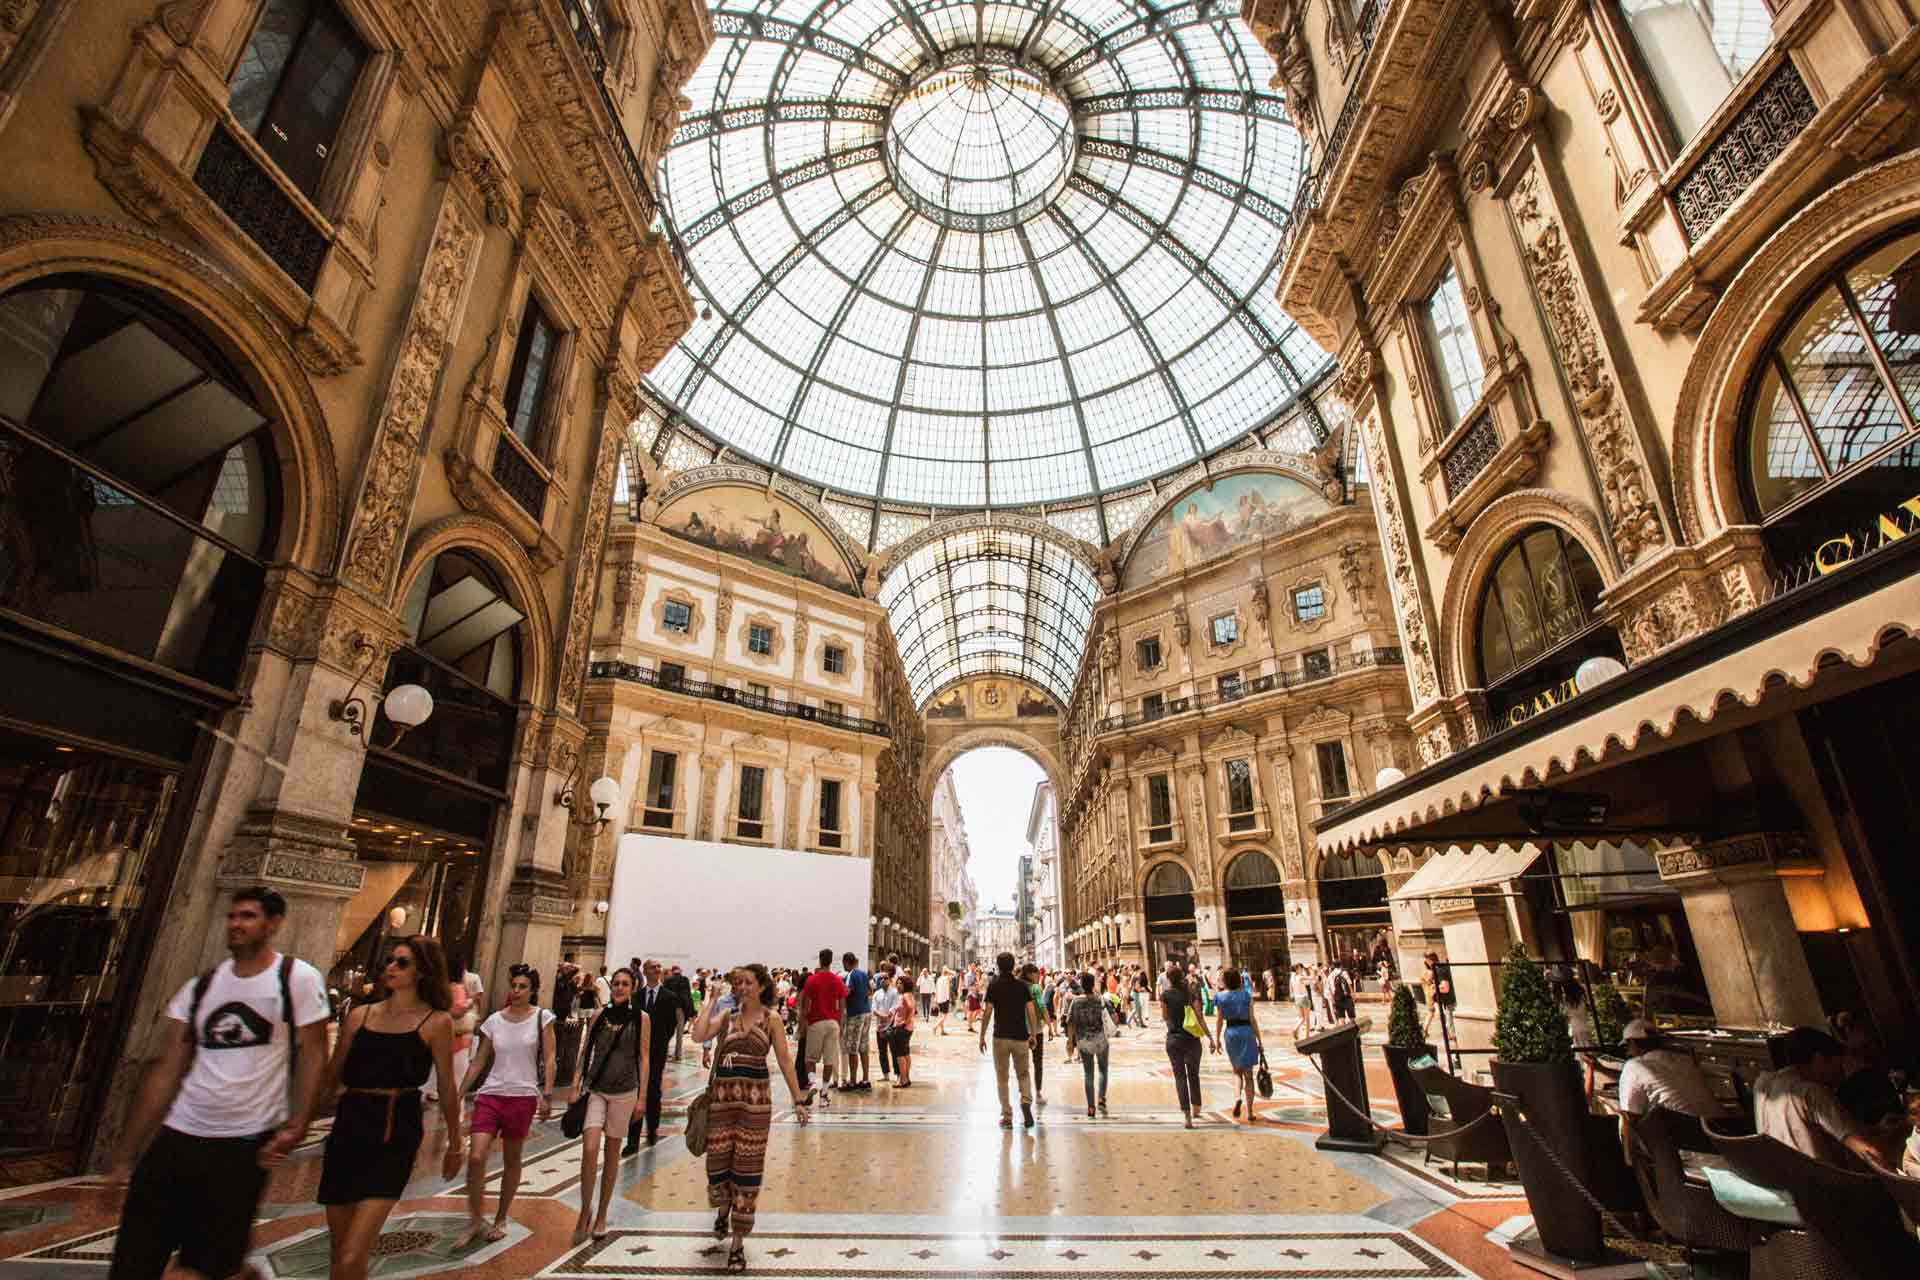 Interior view of the Galleria Vittorio Emanuele in Milano, with its glass dome